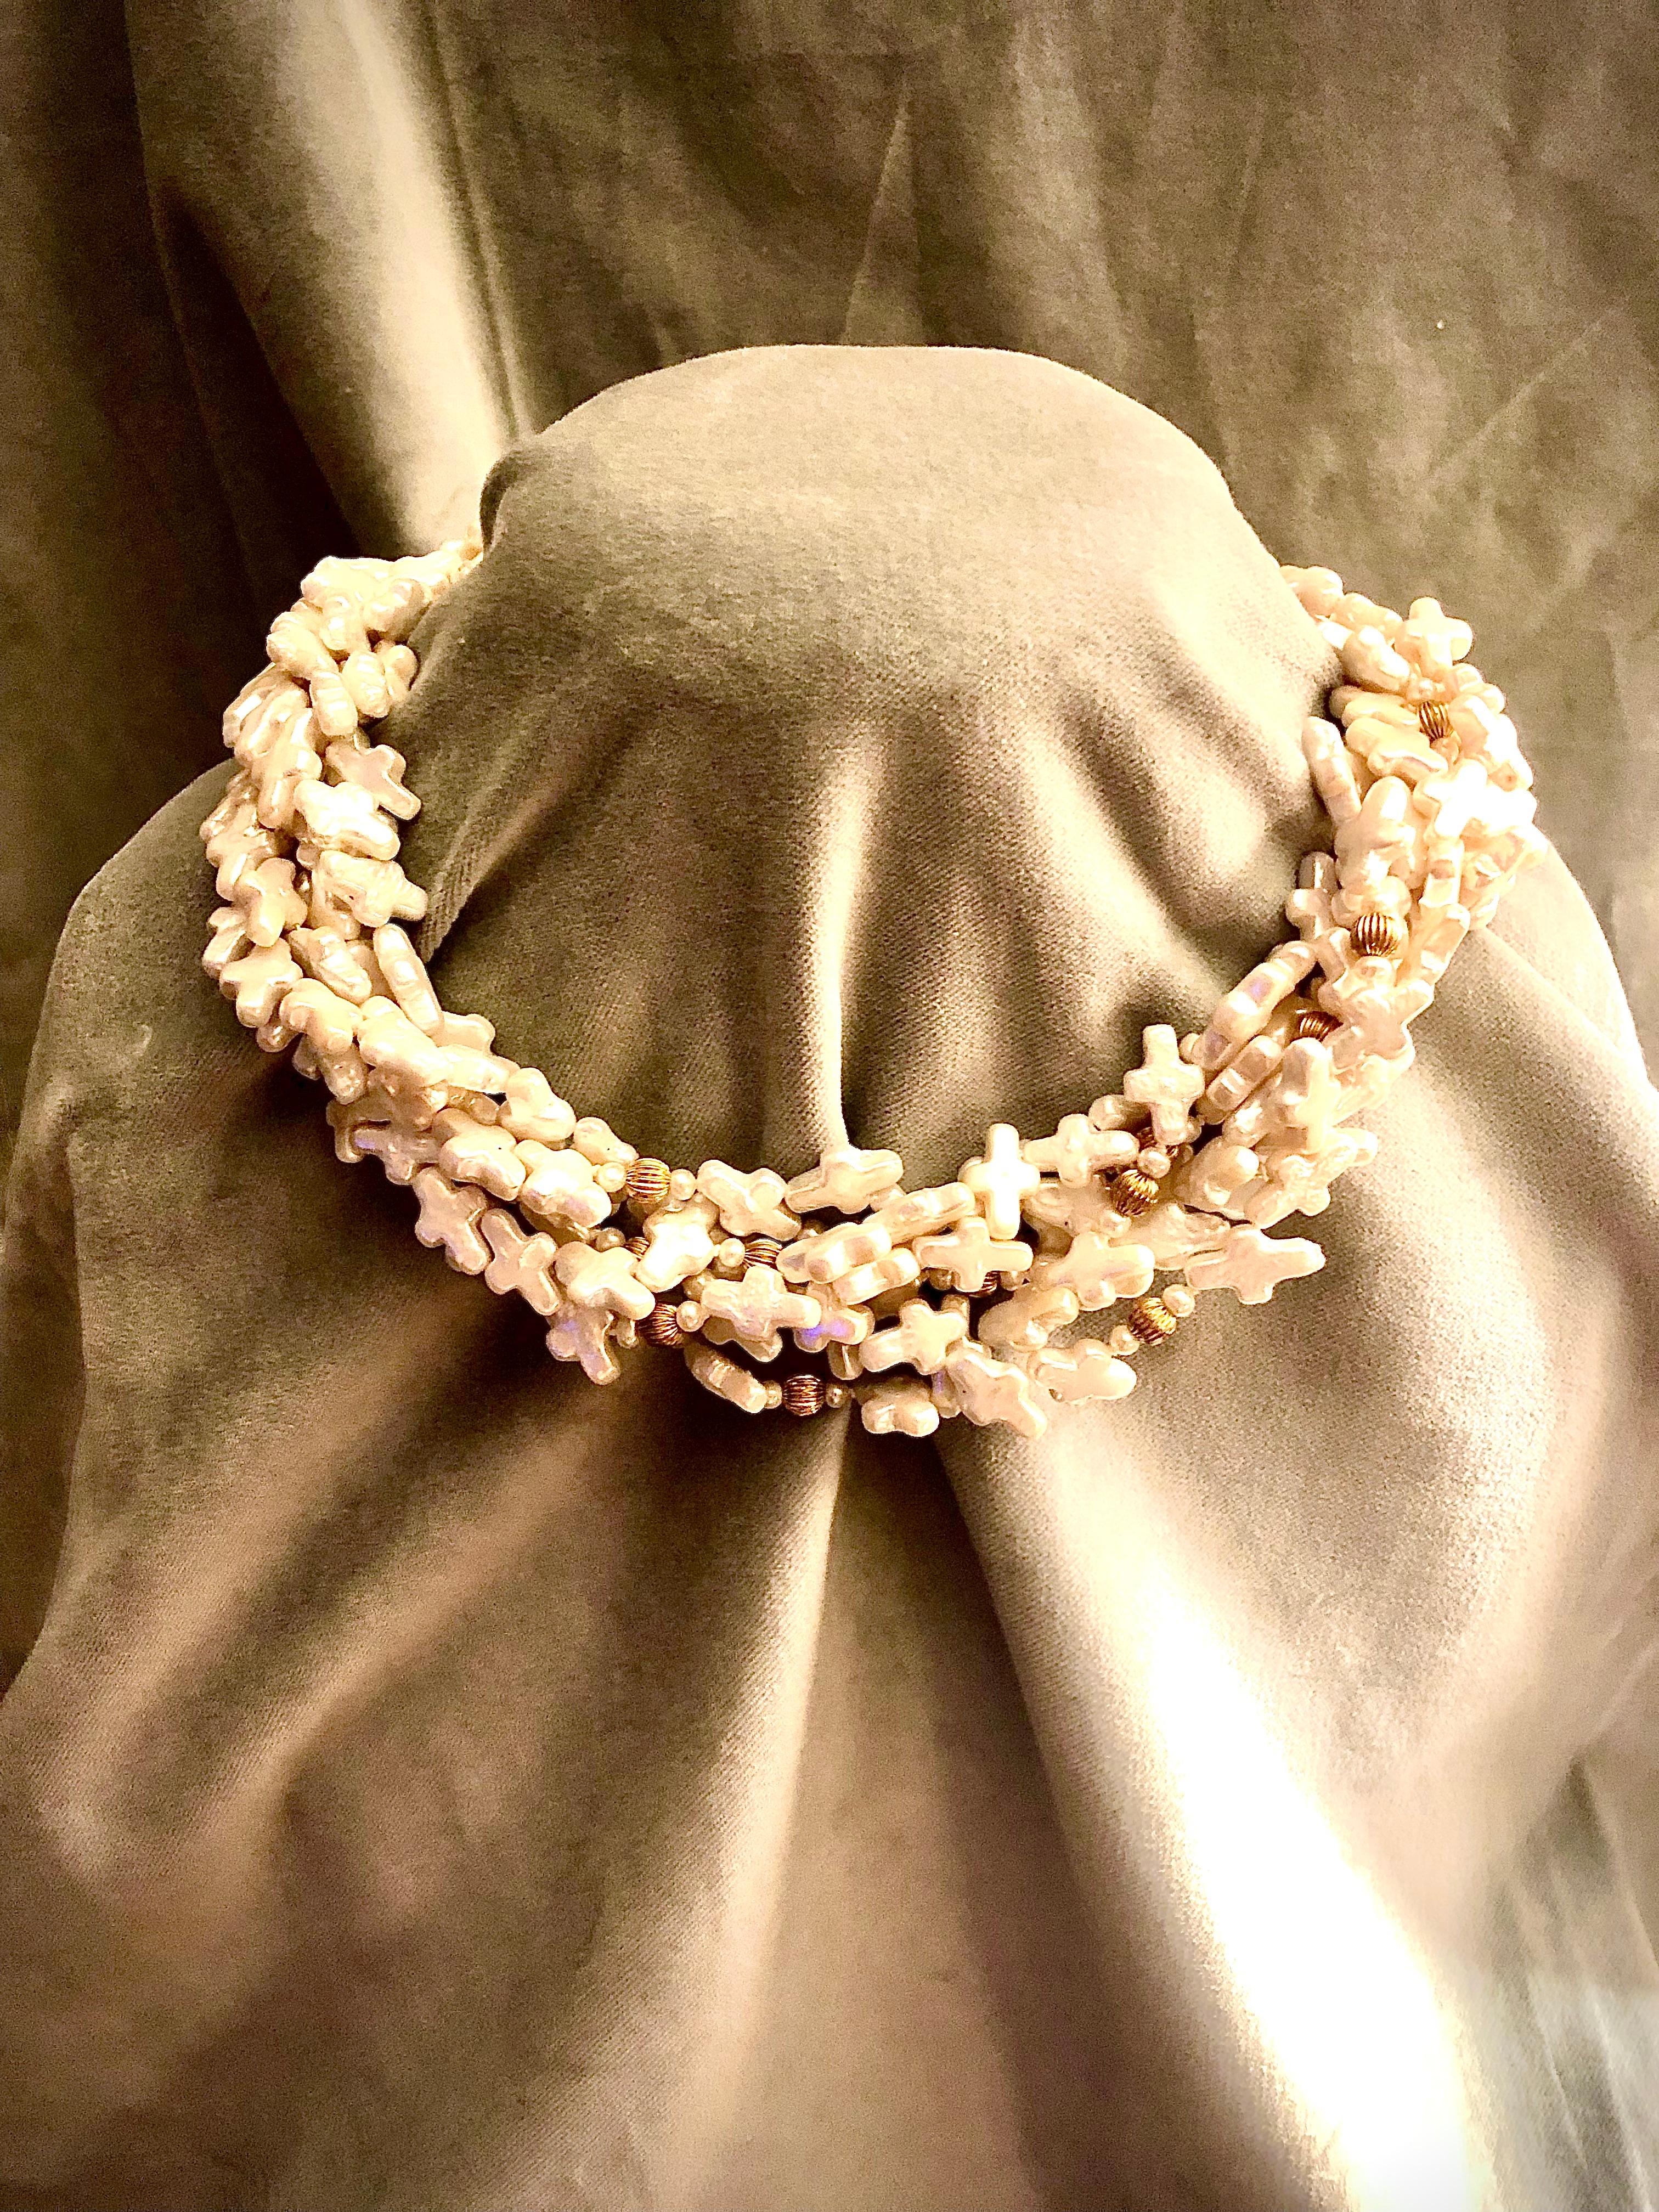 Important and very handsome nine strand necklace of freshwater shaped pearls. Shaped pearls form a beautiful interlocking effect when gently torqued, framing the neck and face most flatteringly.

Pearls have fluted small 14kt. gold balls scattered